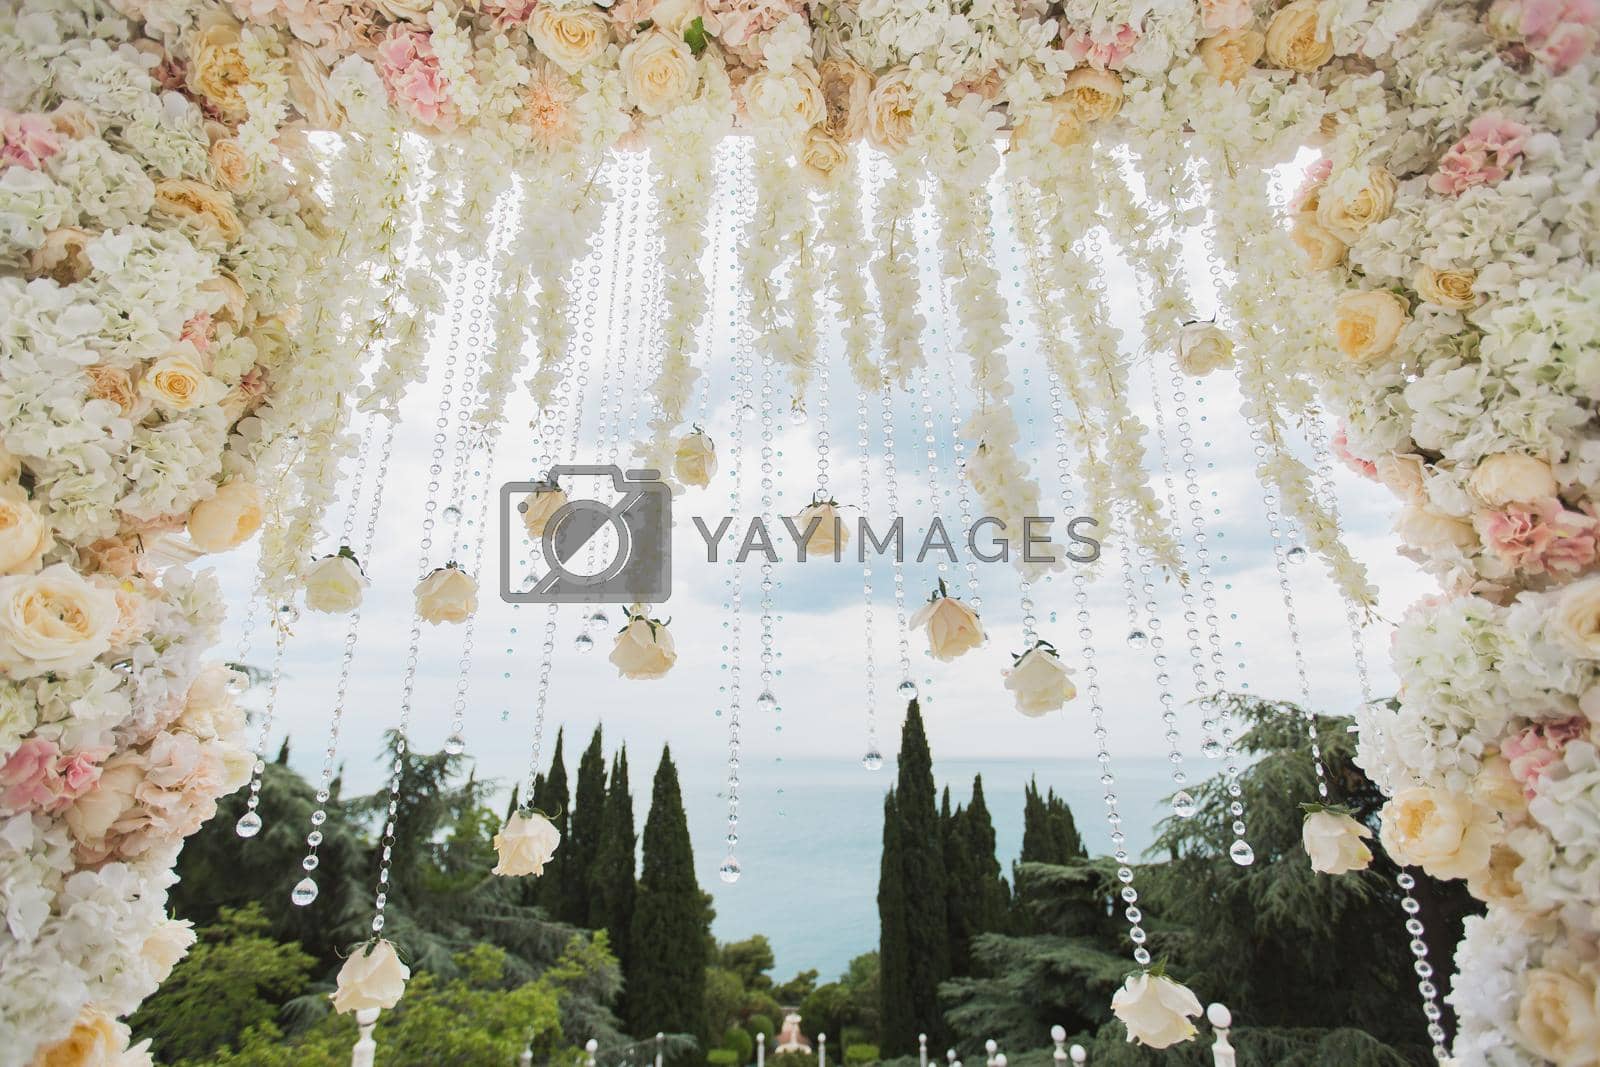 Royalty free image of Wedding arch with flowers and beads on blue sky background close-up by StudioPeace